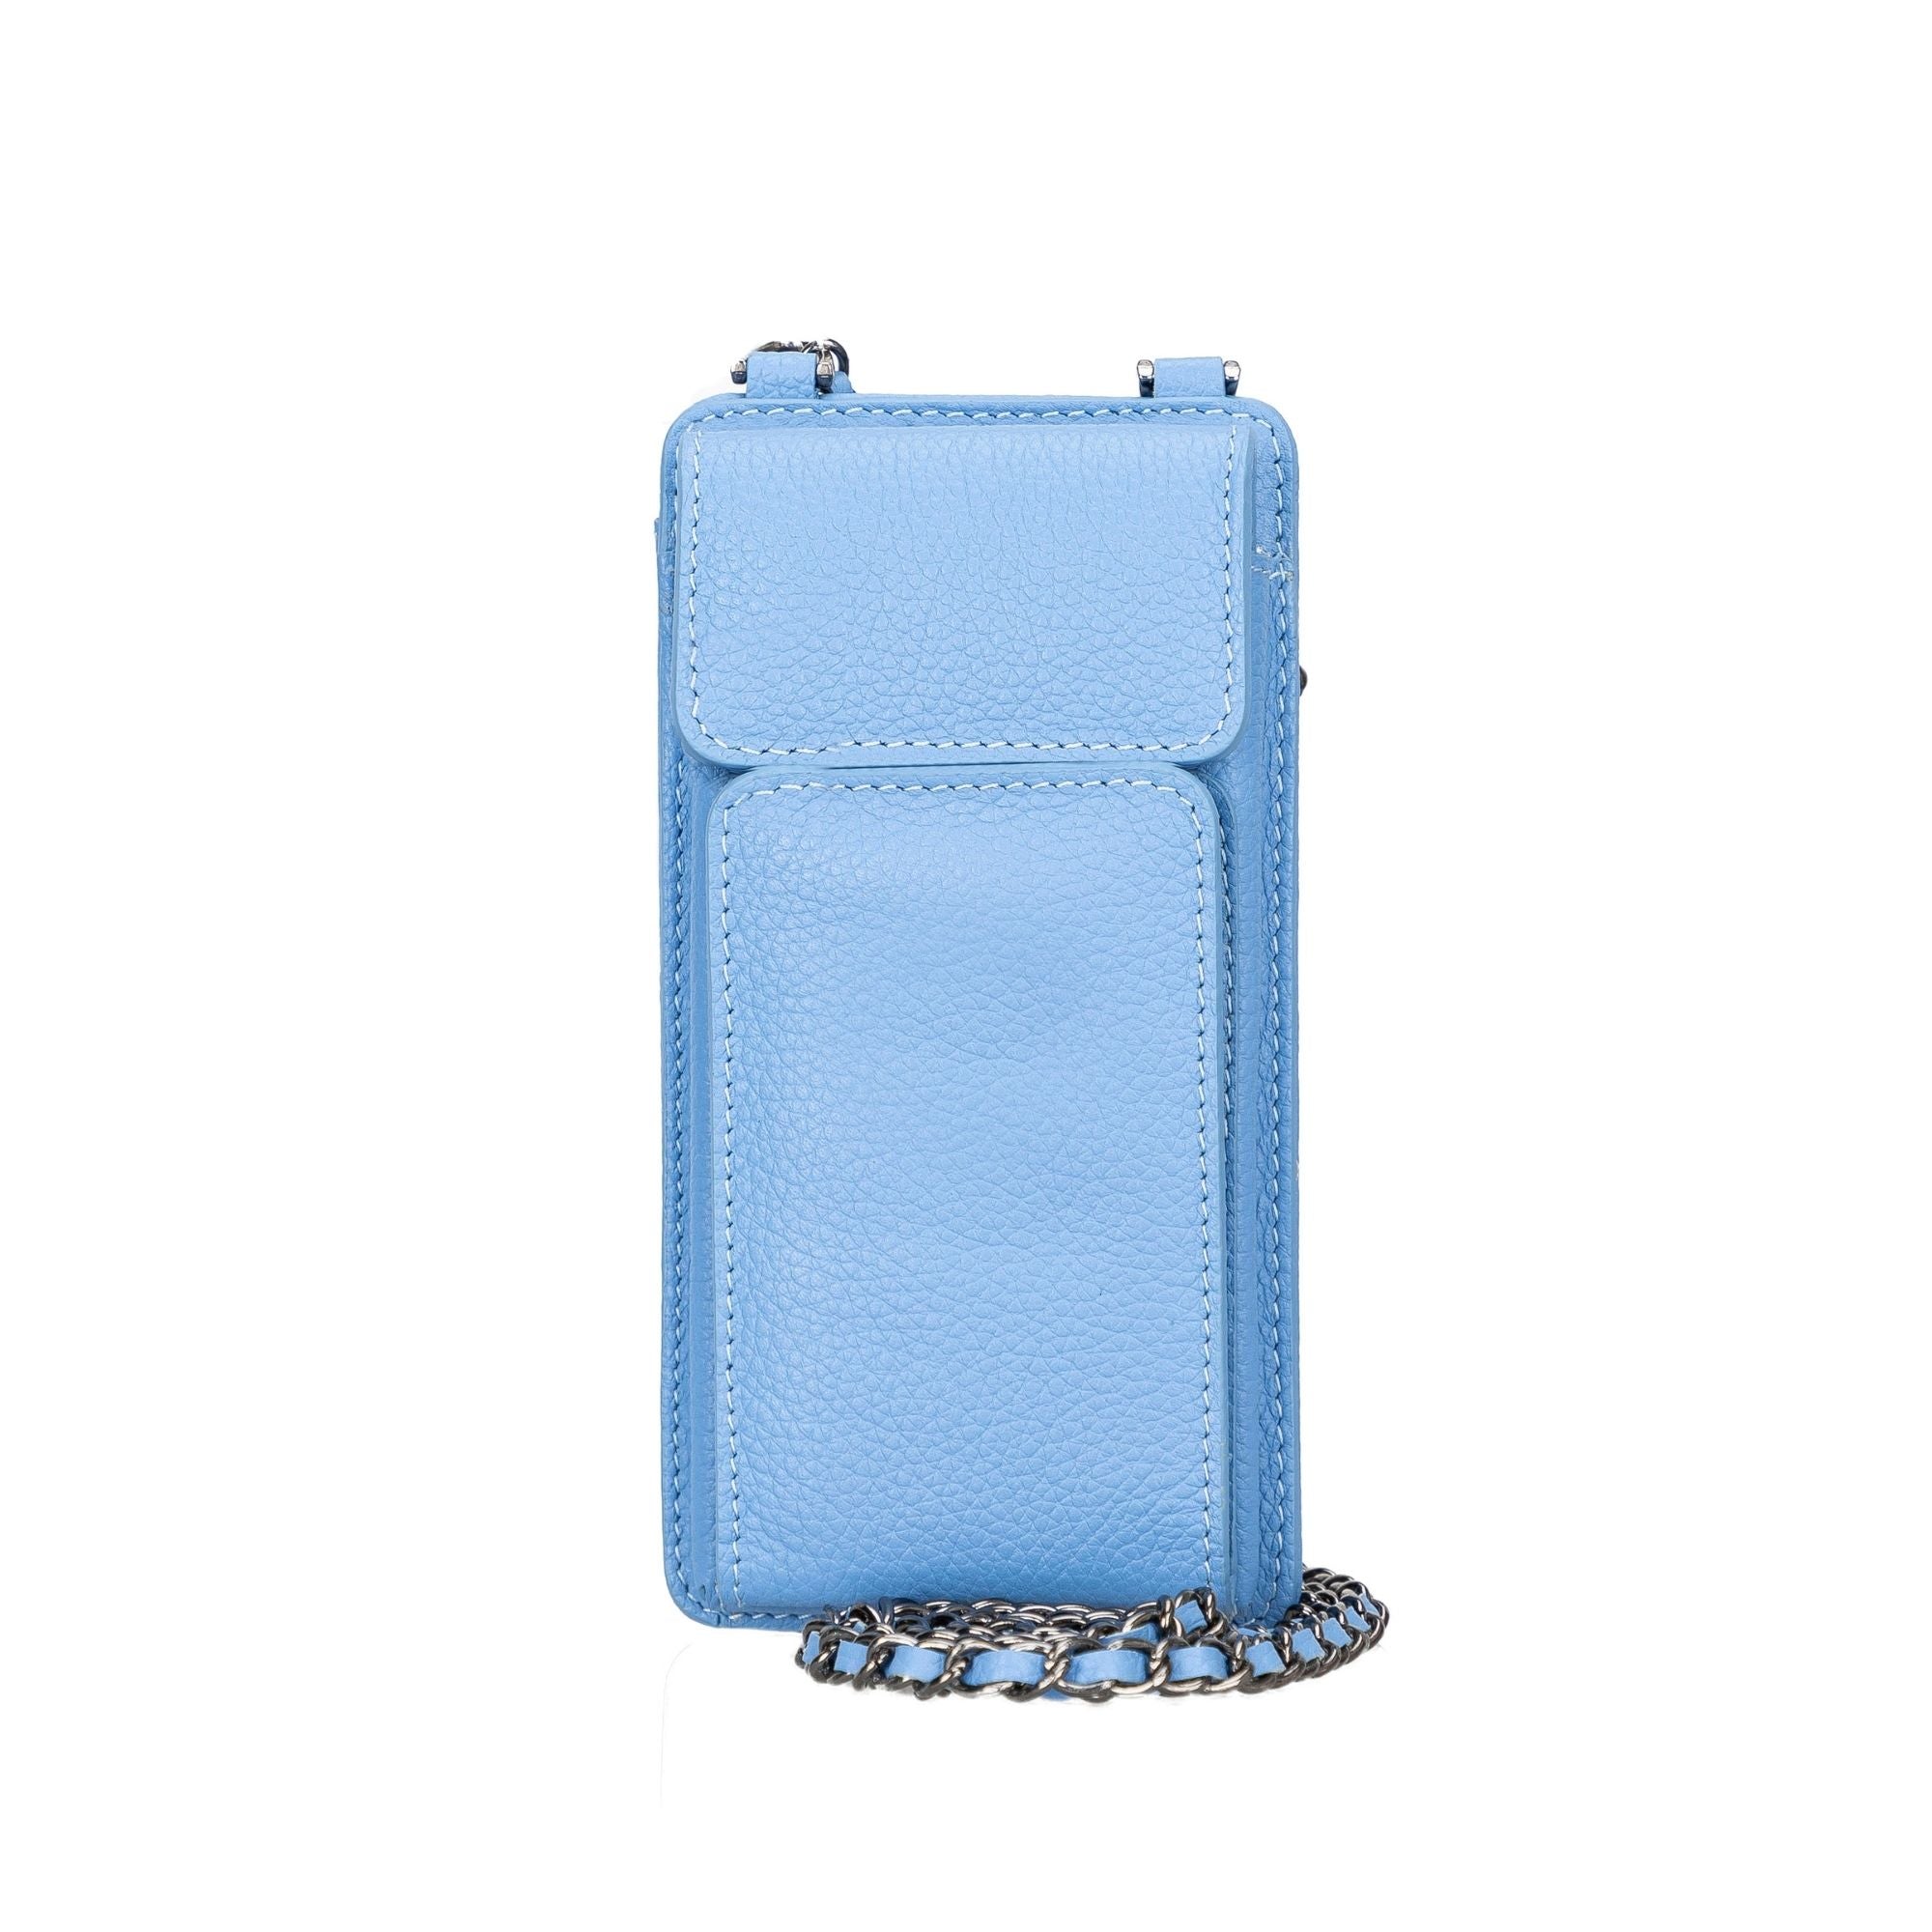 Lovell Leather Handbag with Phone Compartment and Shoulder Strap - Light Blue - TORONATA